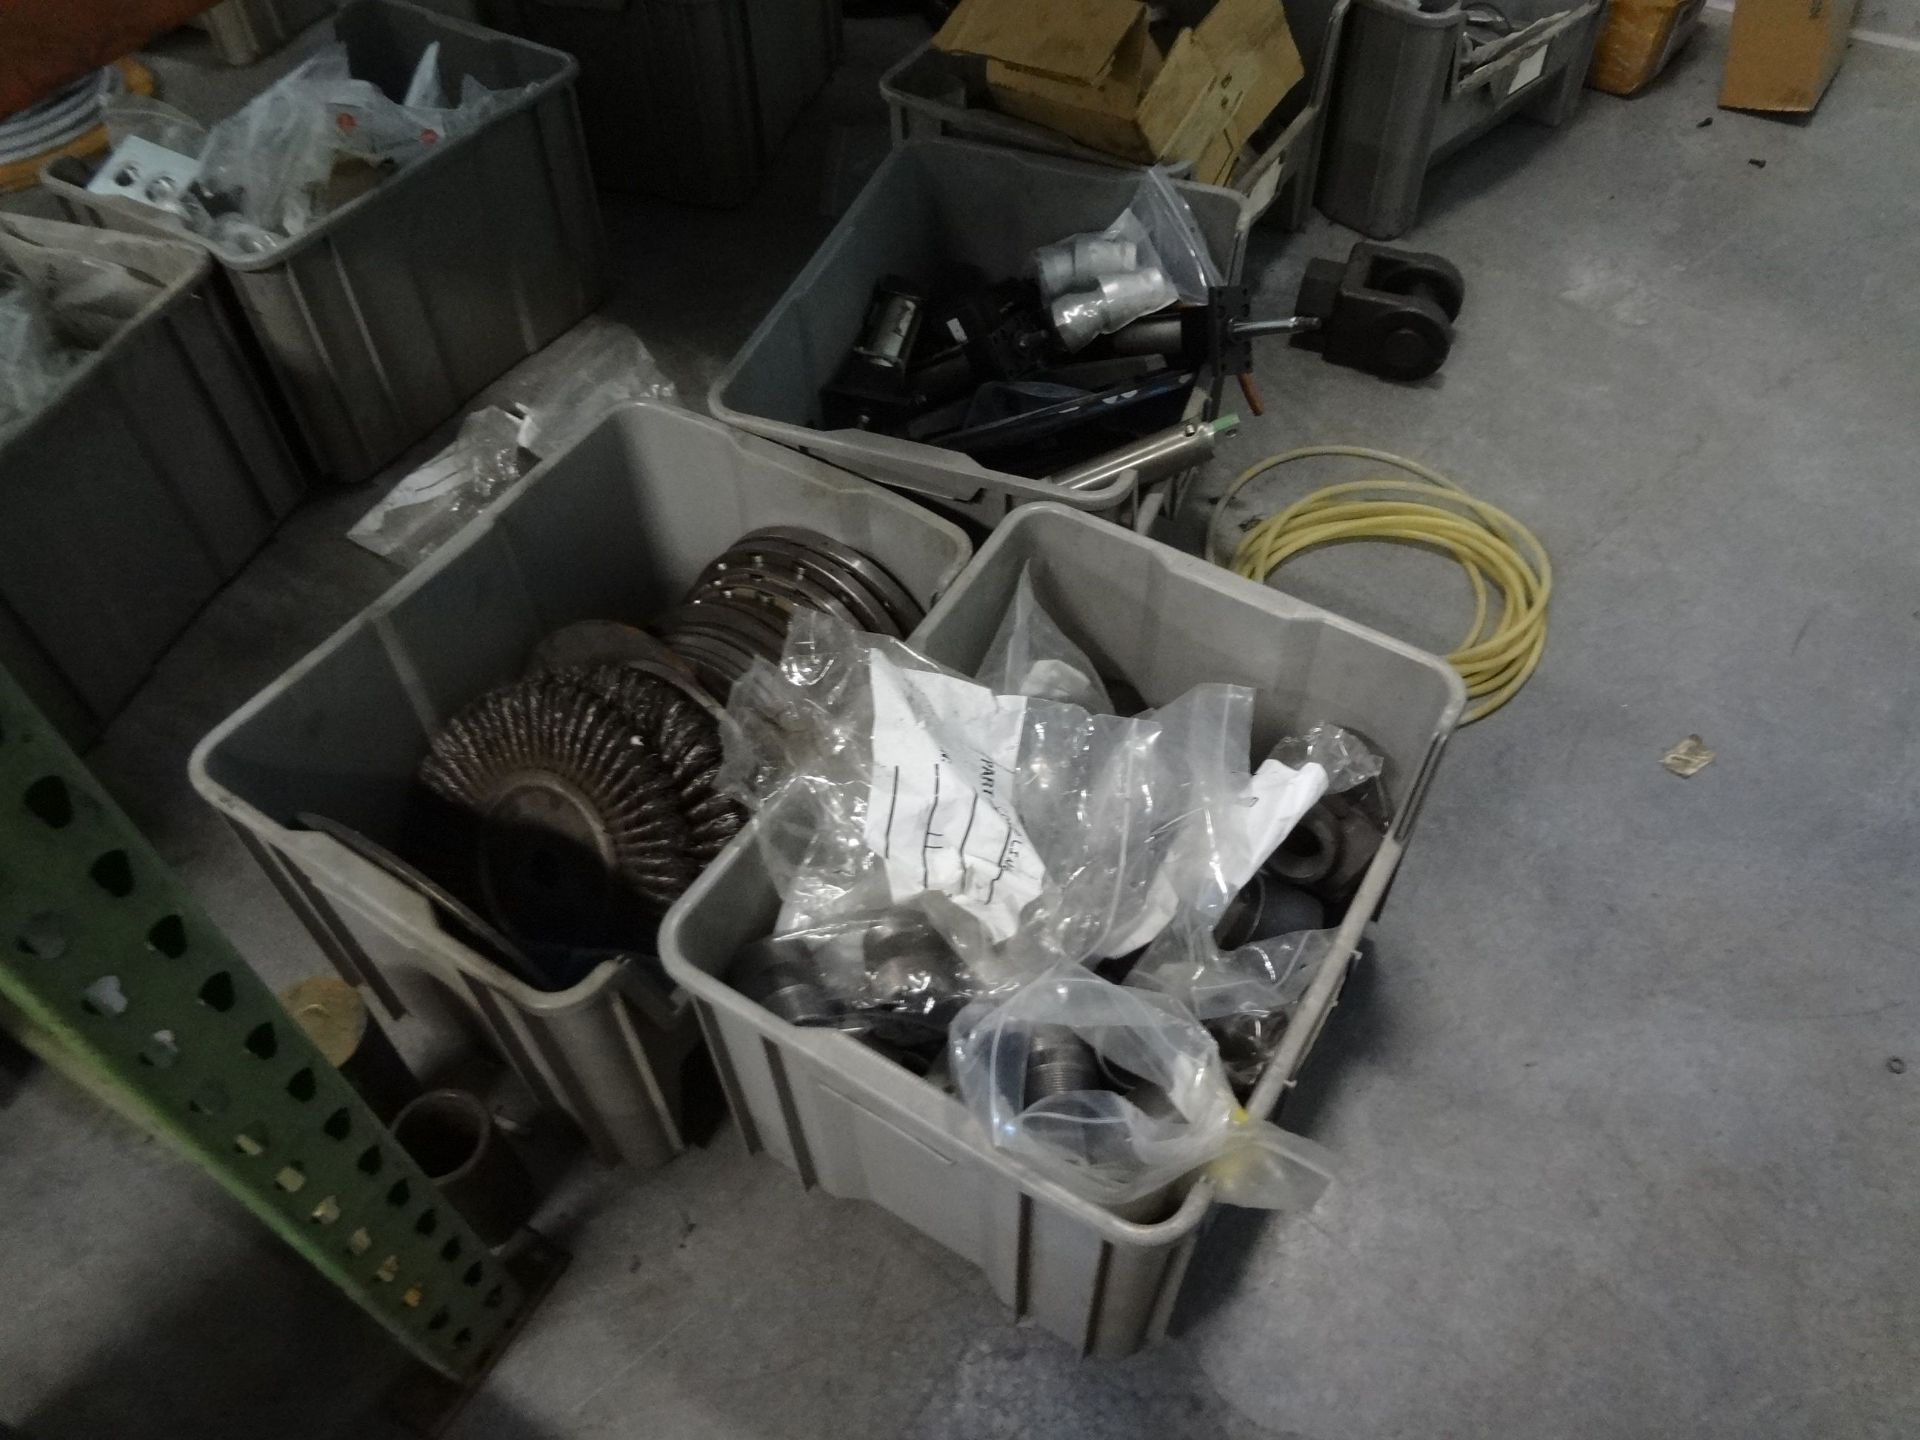 (LOT) CONTENTS PARTS ROOM INCLUDING HOSE, WIRE, HARDWARE, MOTORS, HYDRAULIC CYCLINDERS, CHAINS, - Image 8 of 11